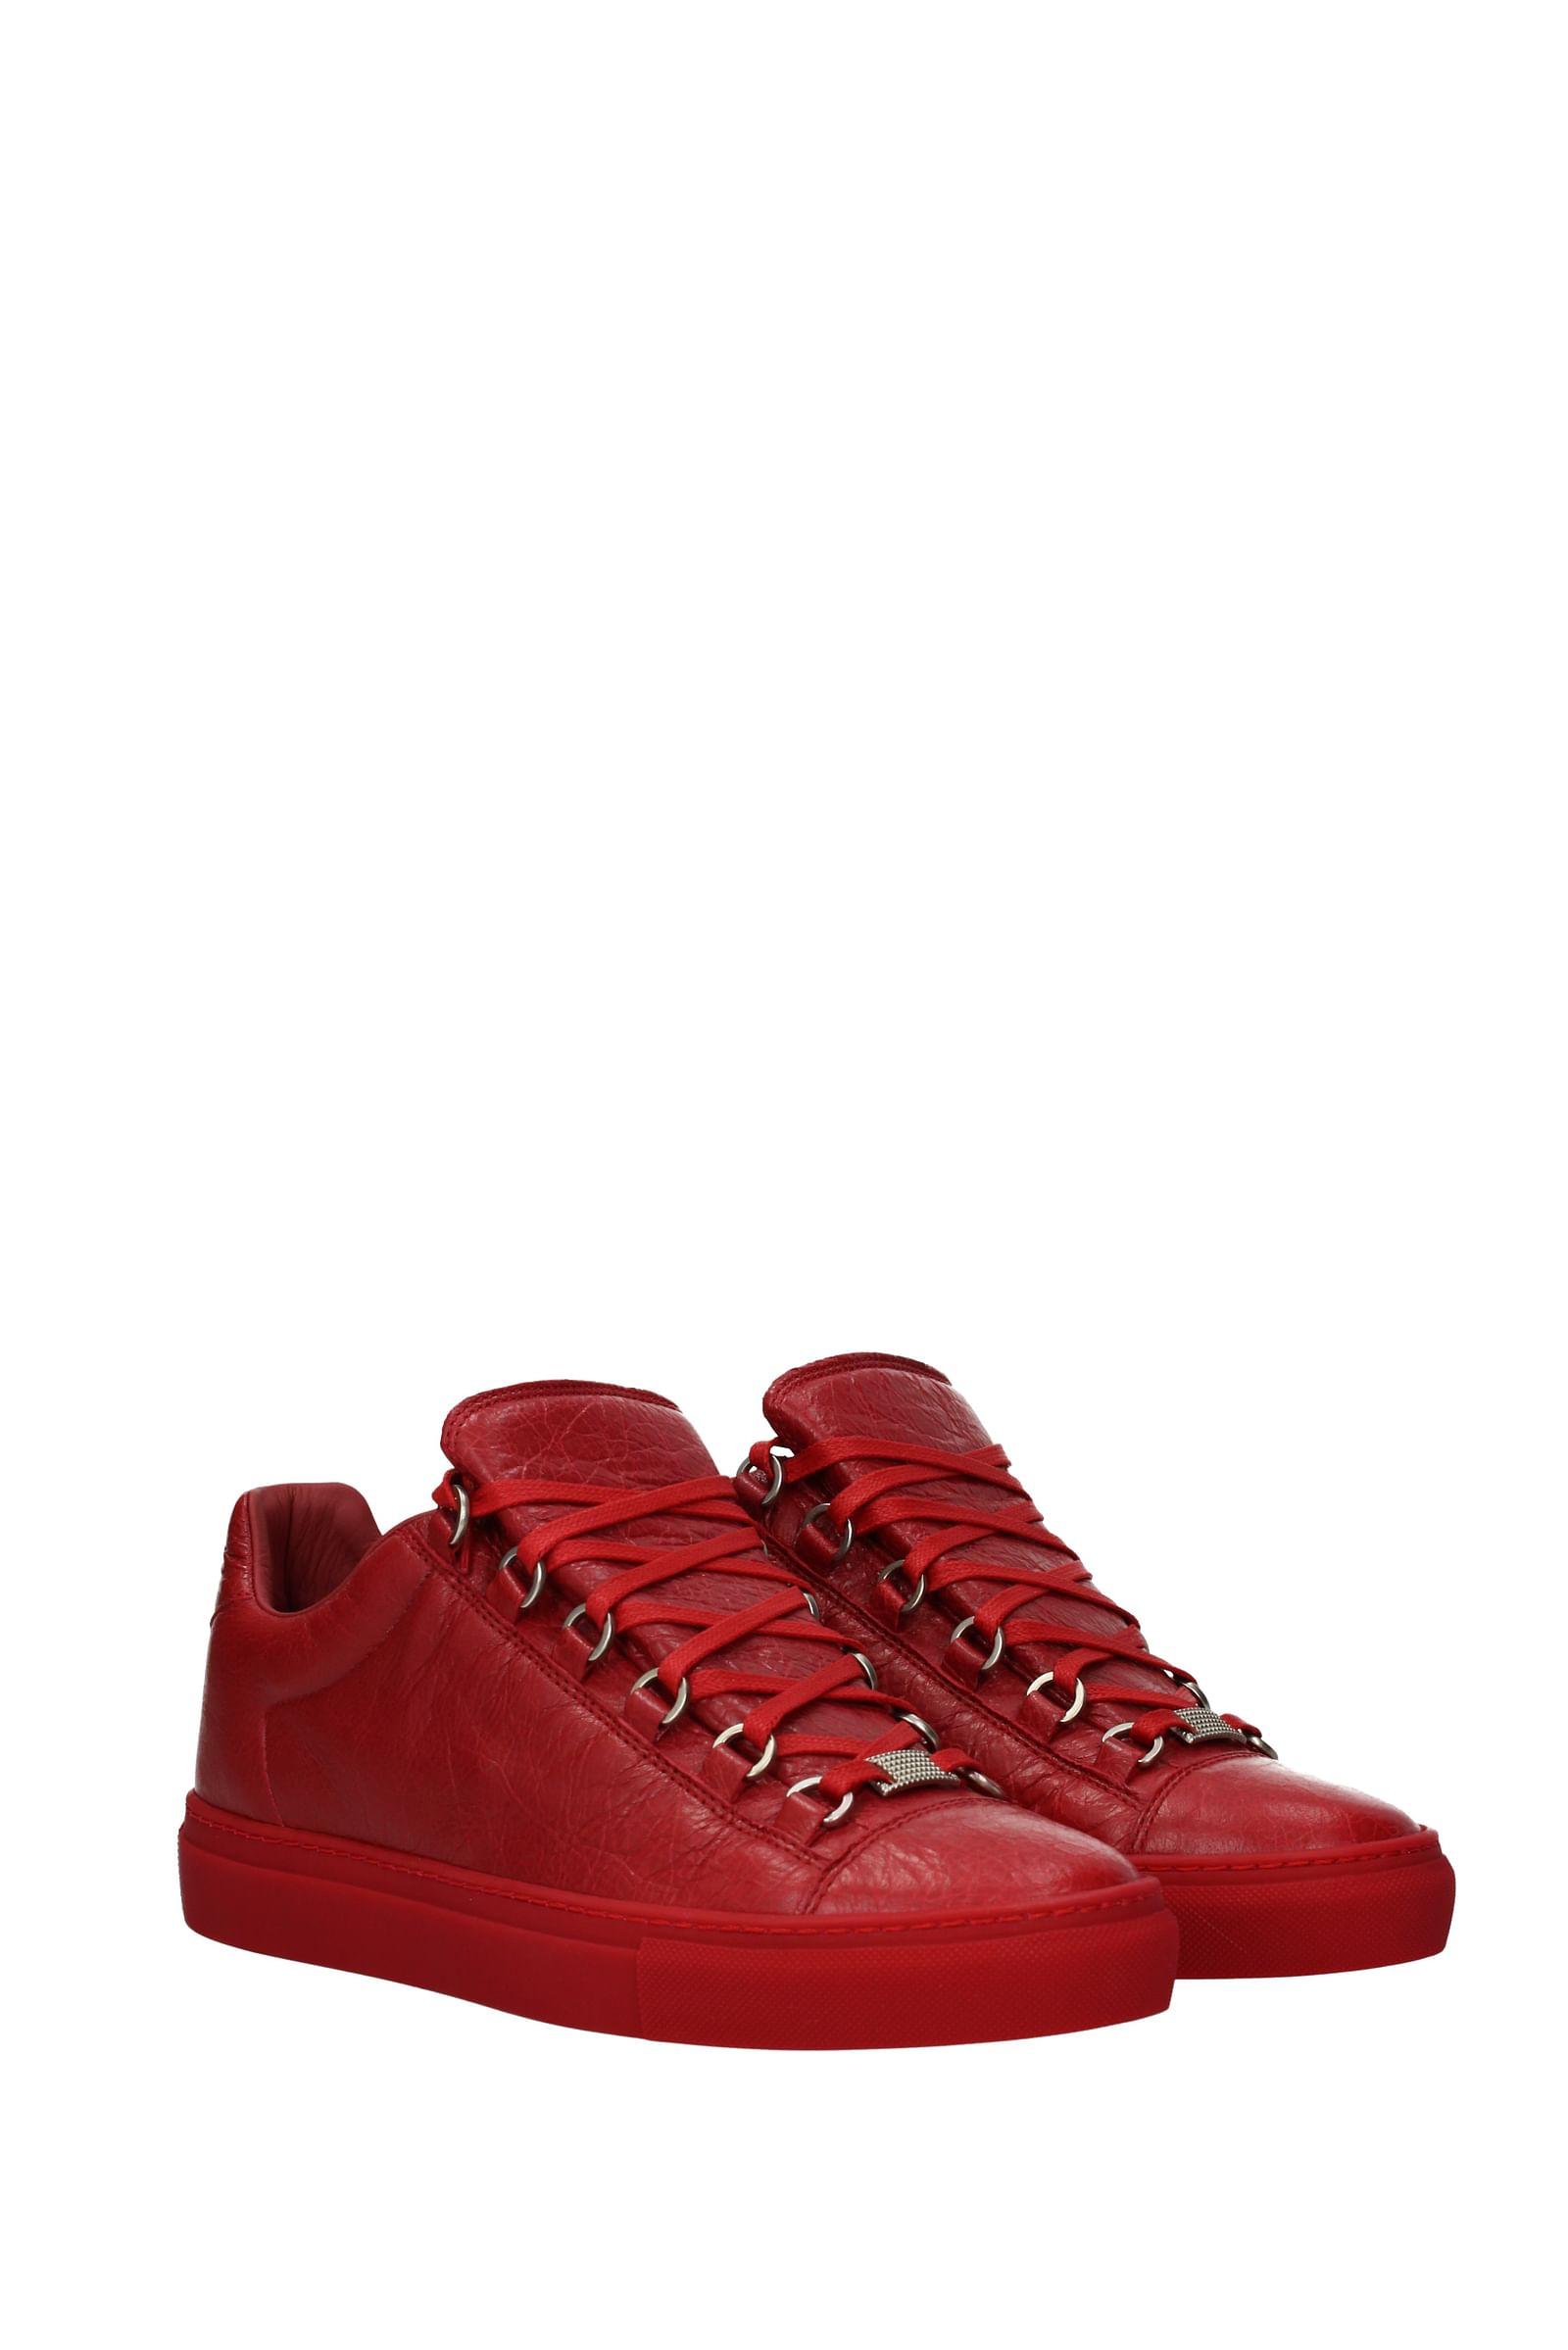 Balenciaga Red Sneakers for Men - Lyst